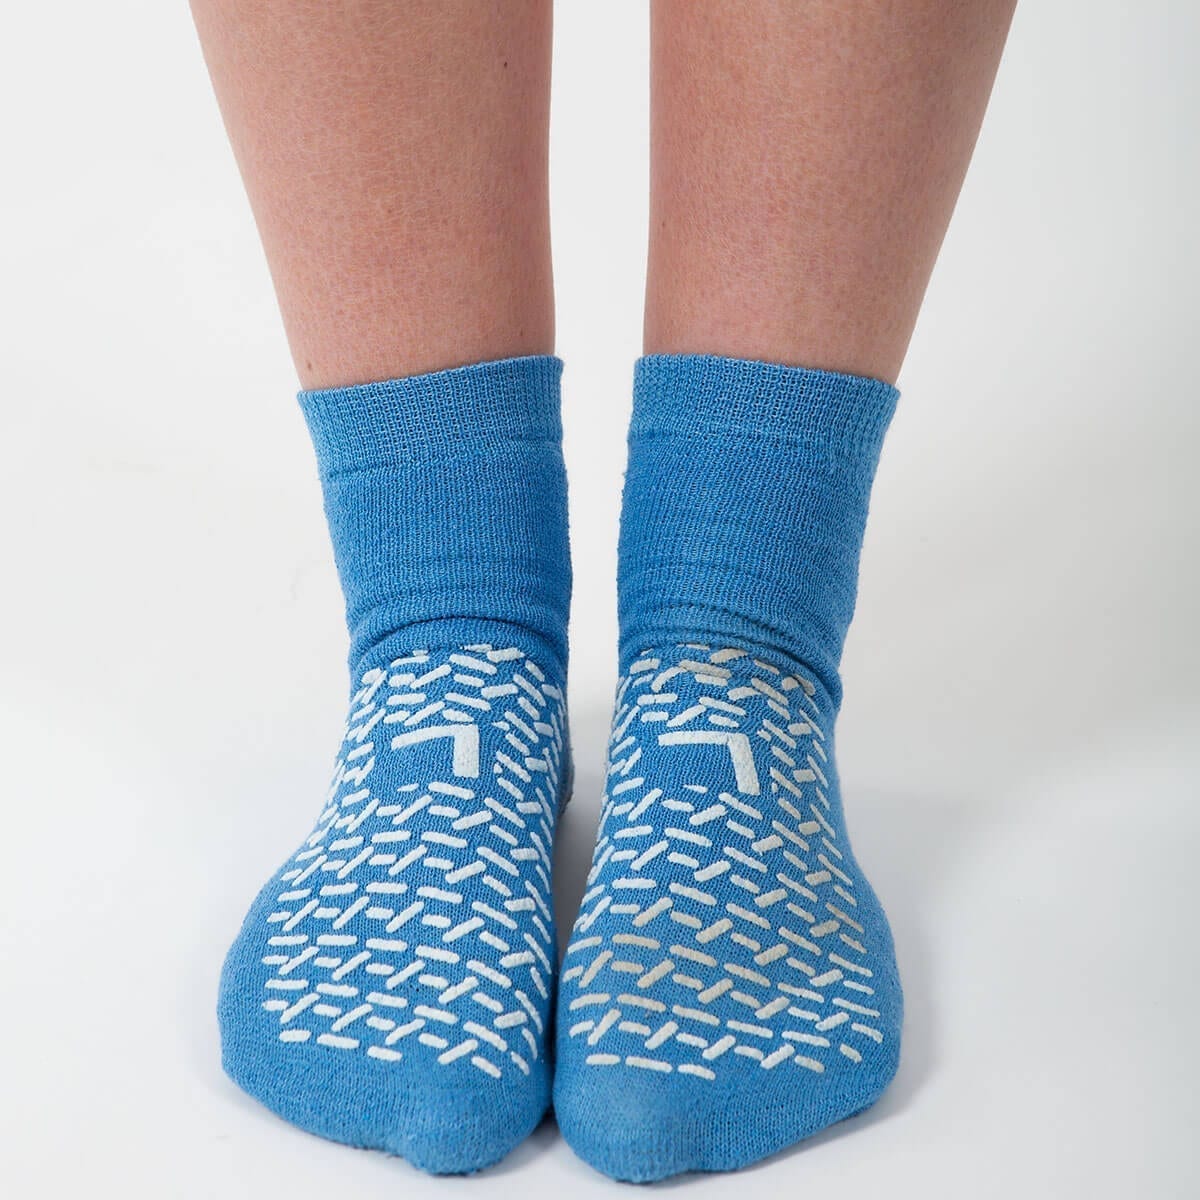 Large Gripper Socks With Tread Both Sides | Interweave Healthcare